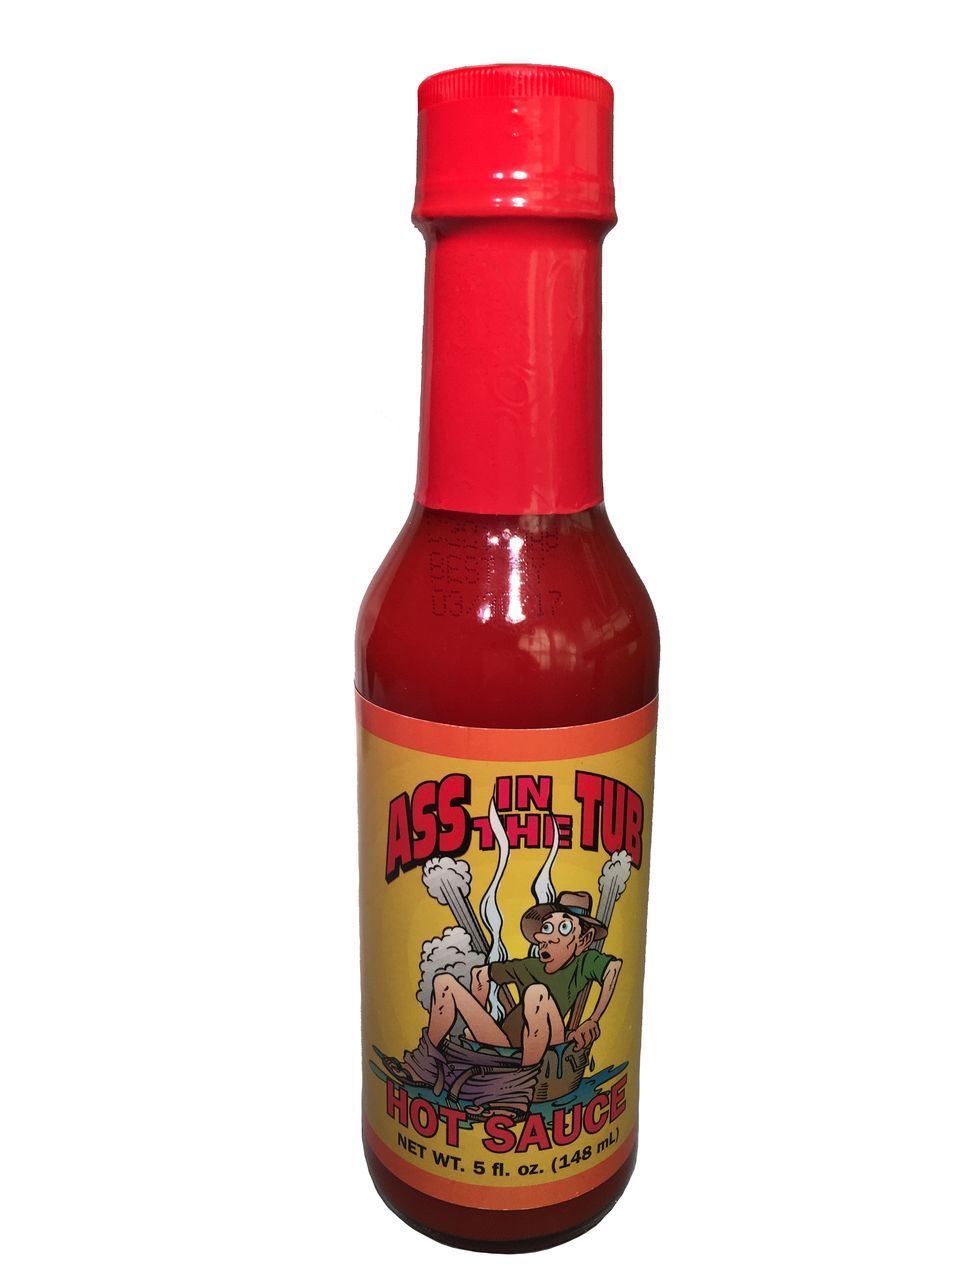 Ass in the tub hot sauce